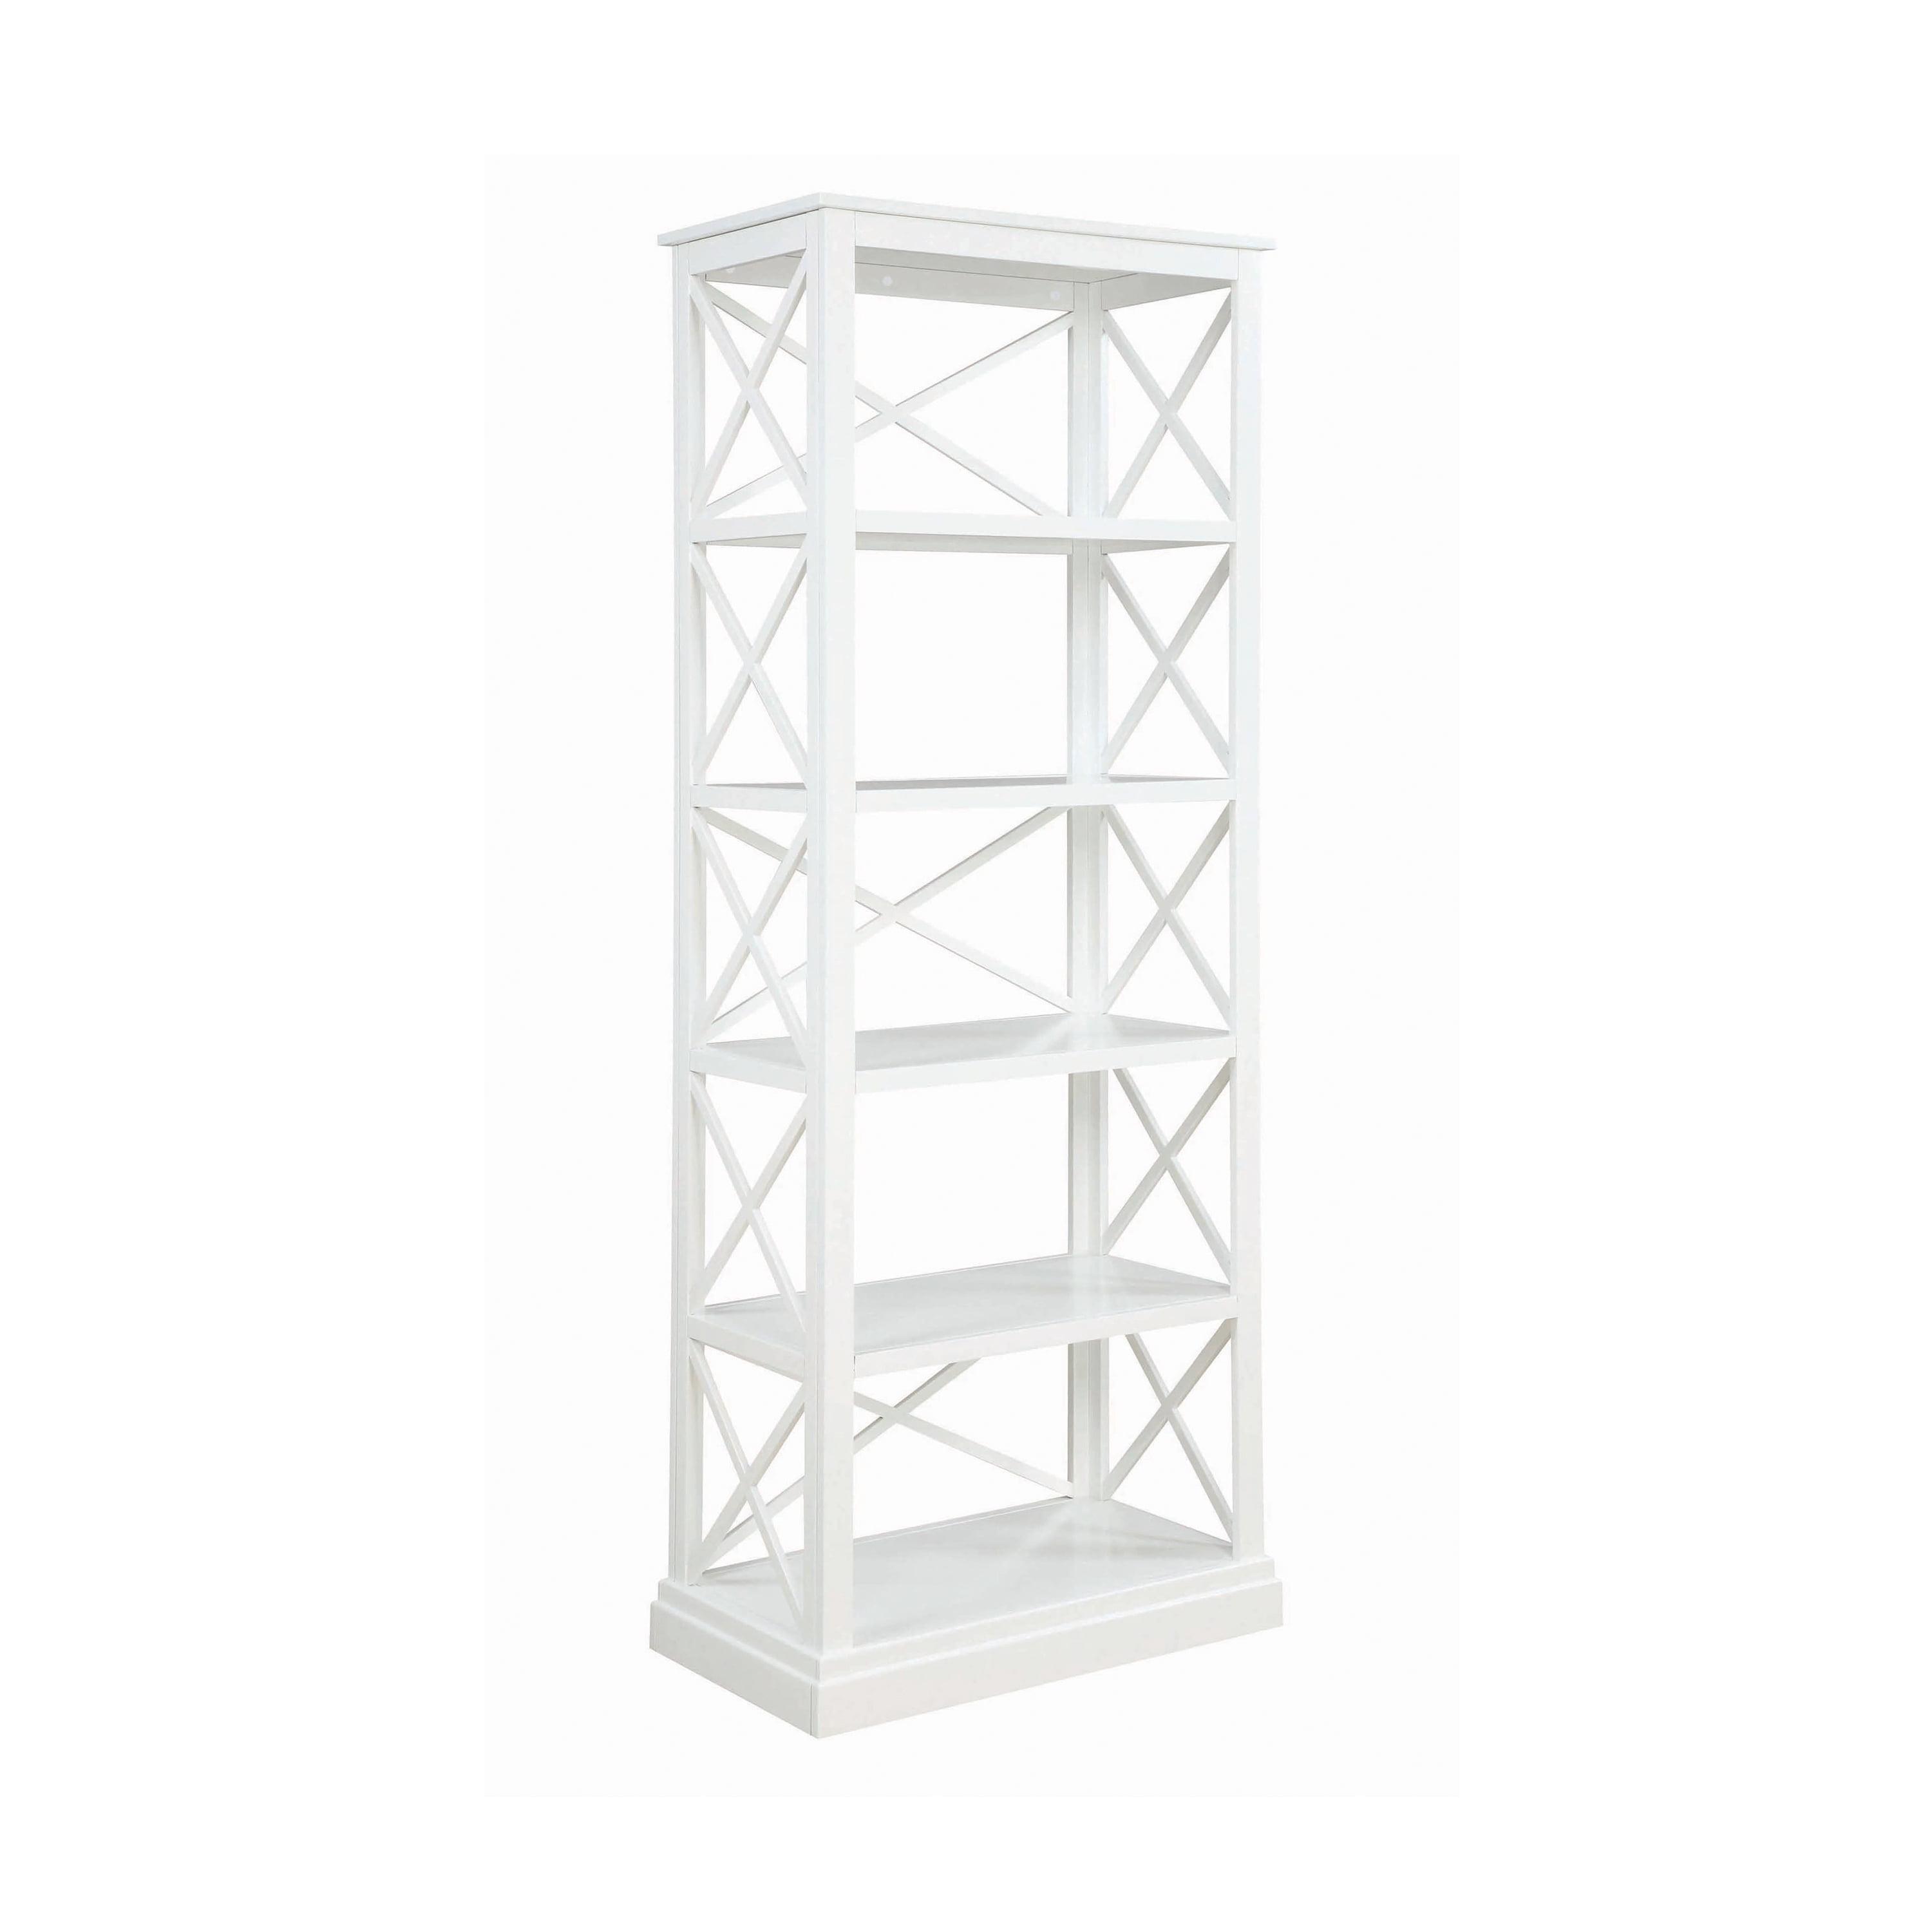 Modern Antique White 5-Shelf Bookcase with X Detailing